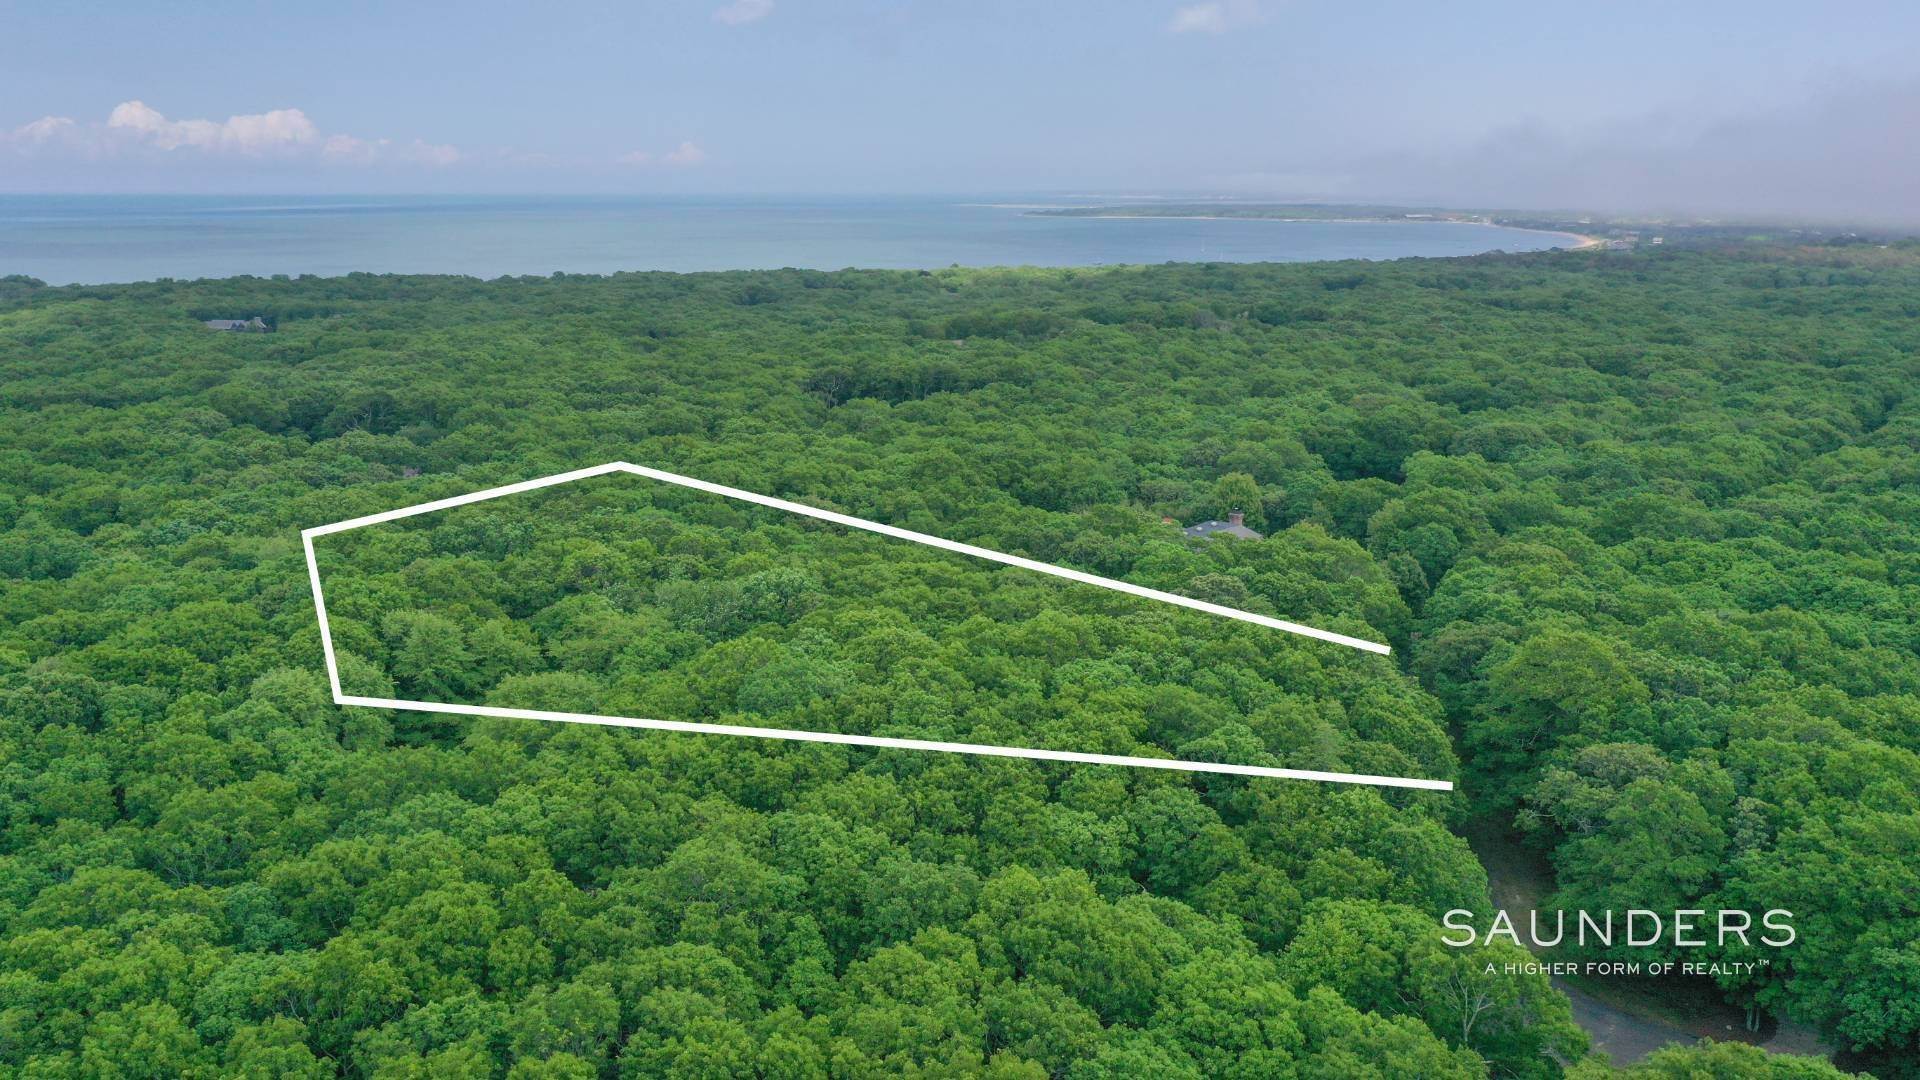 Land for Sale at Prime Building Lot: Build Your Dream Home 62 Canvasback Lane, Amagansett, NY 11930